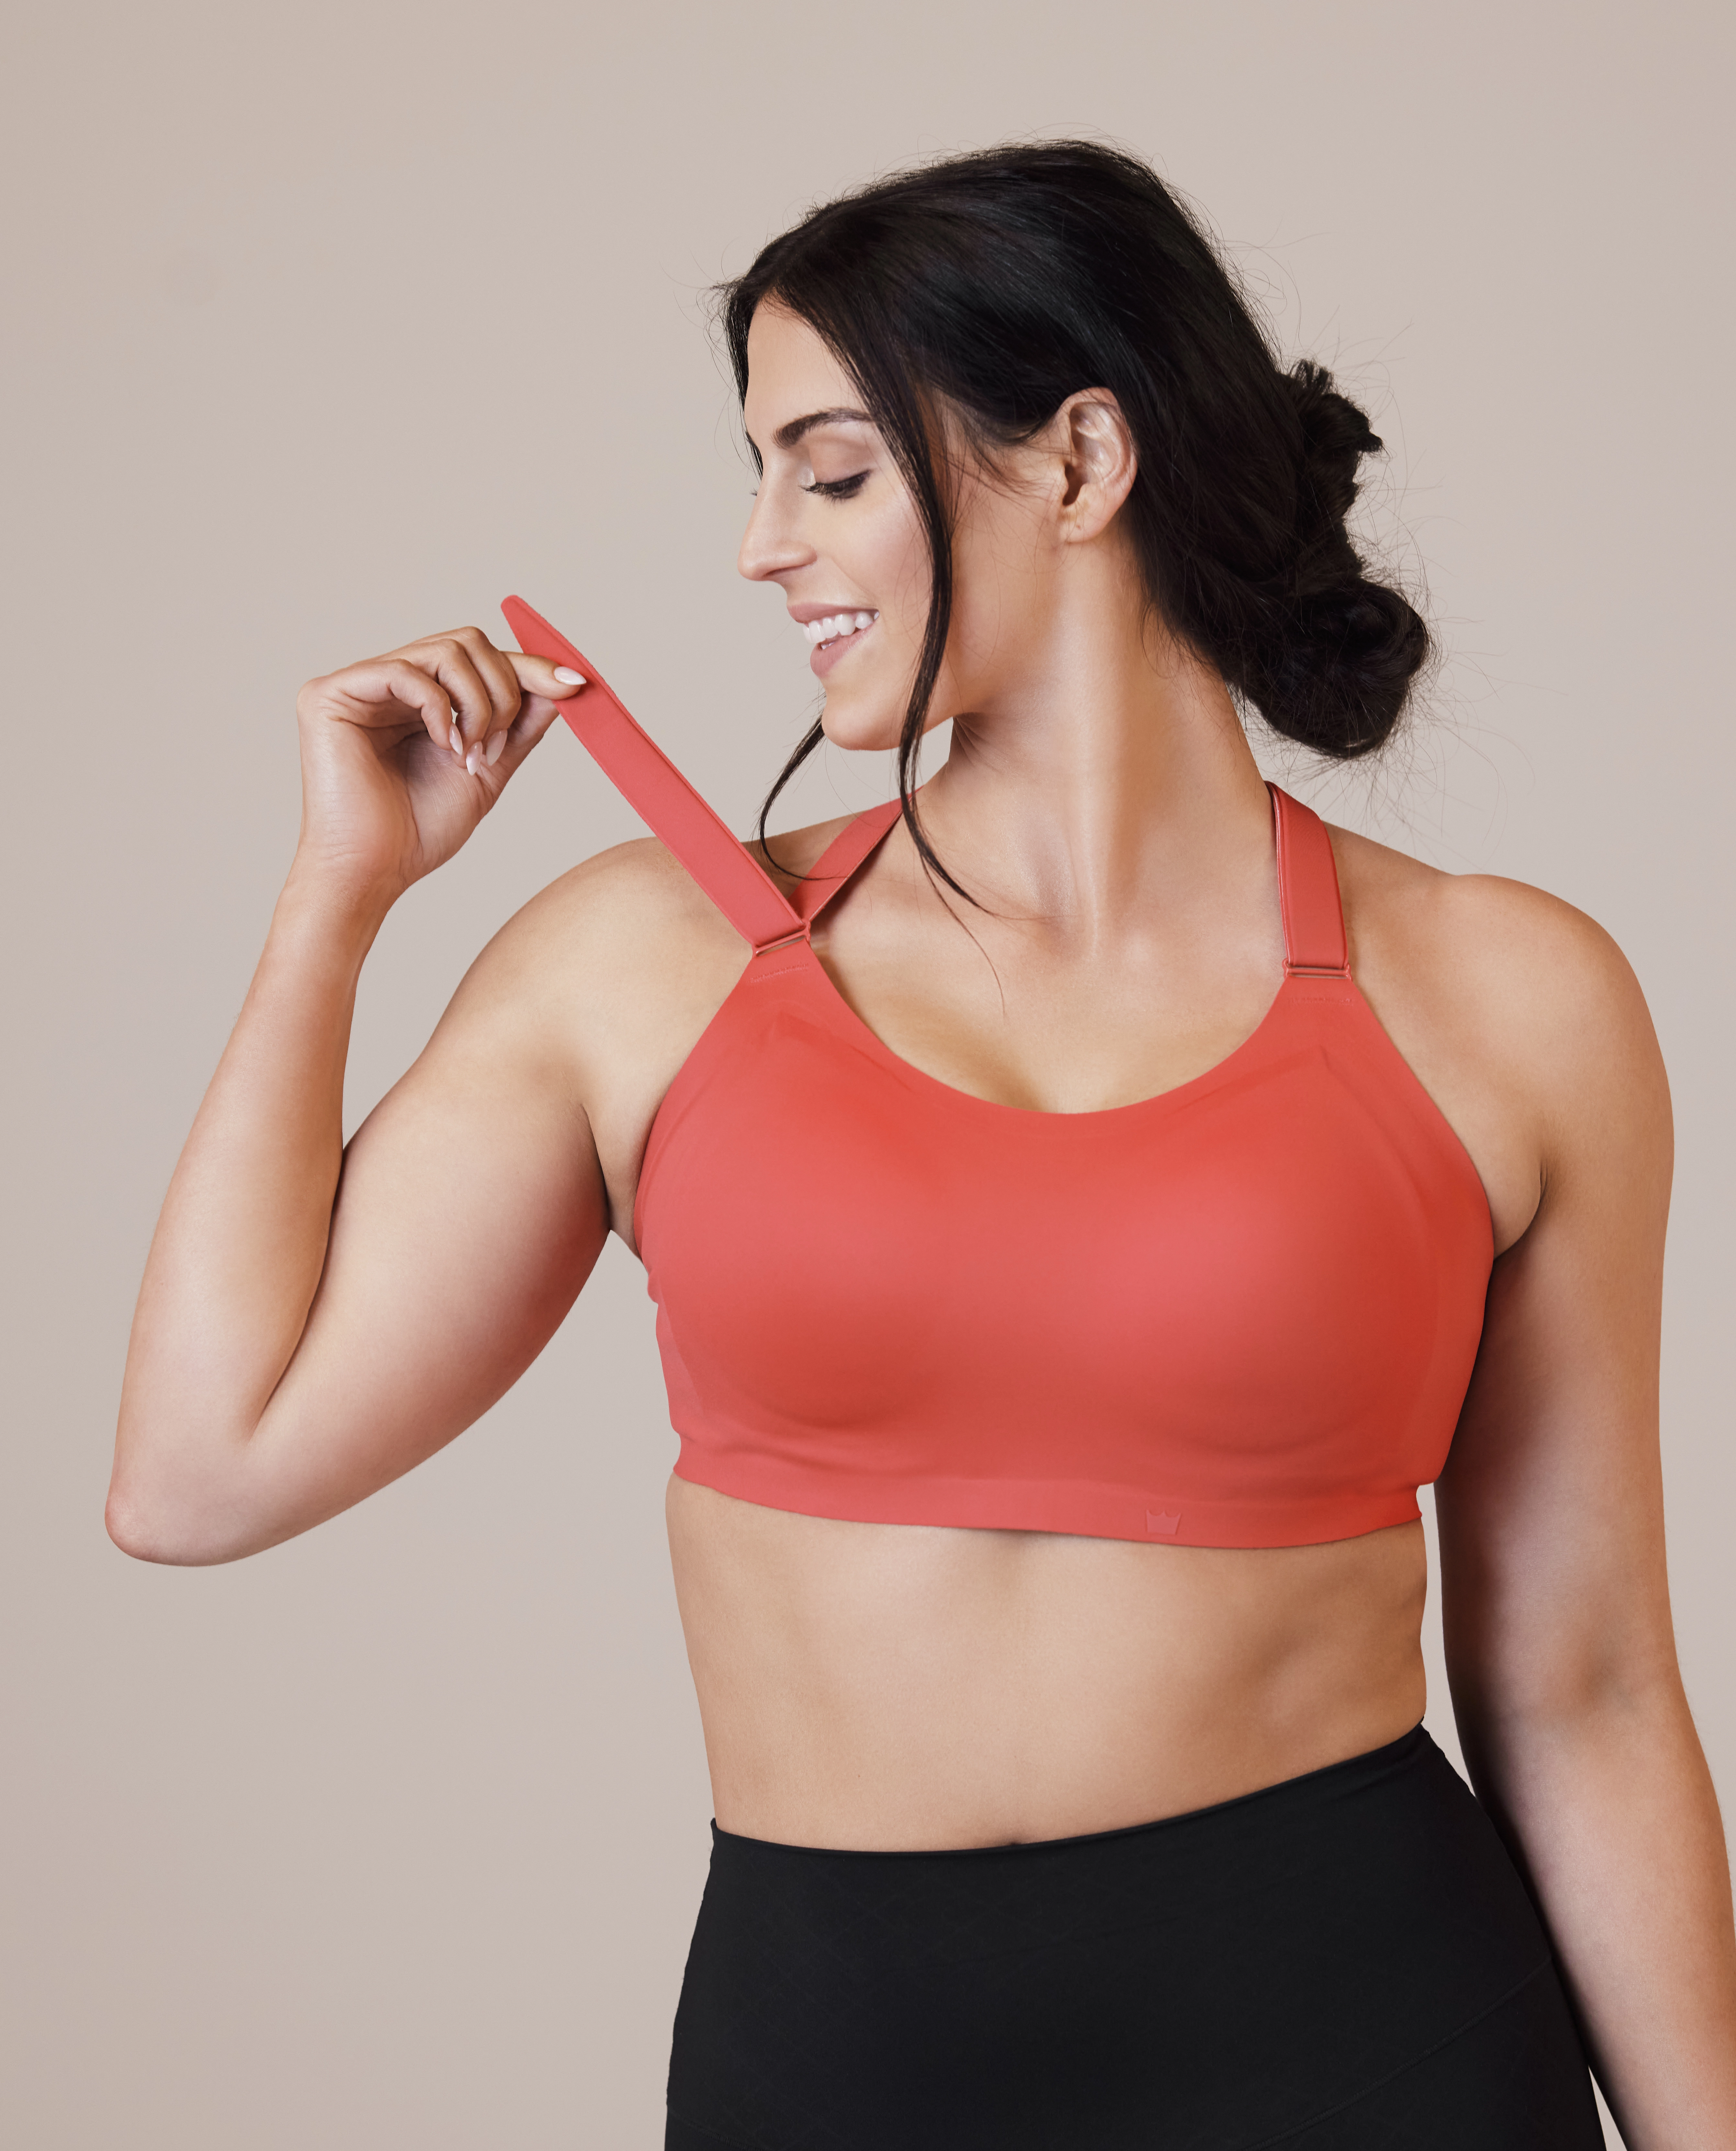 Black SHEFIT® Flex Sports Bra. The Support and Fit like no other